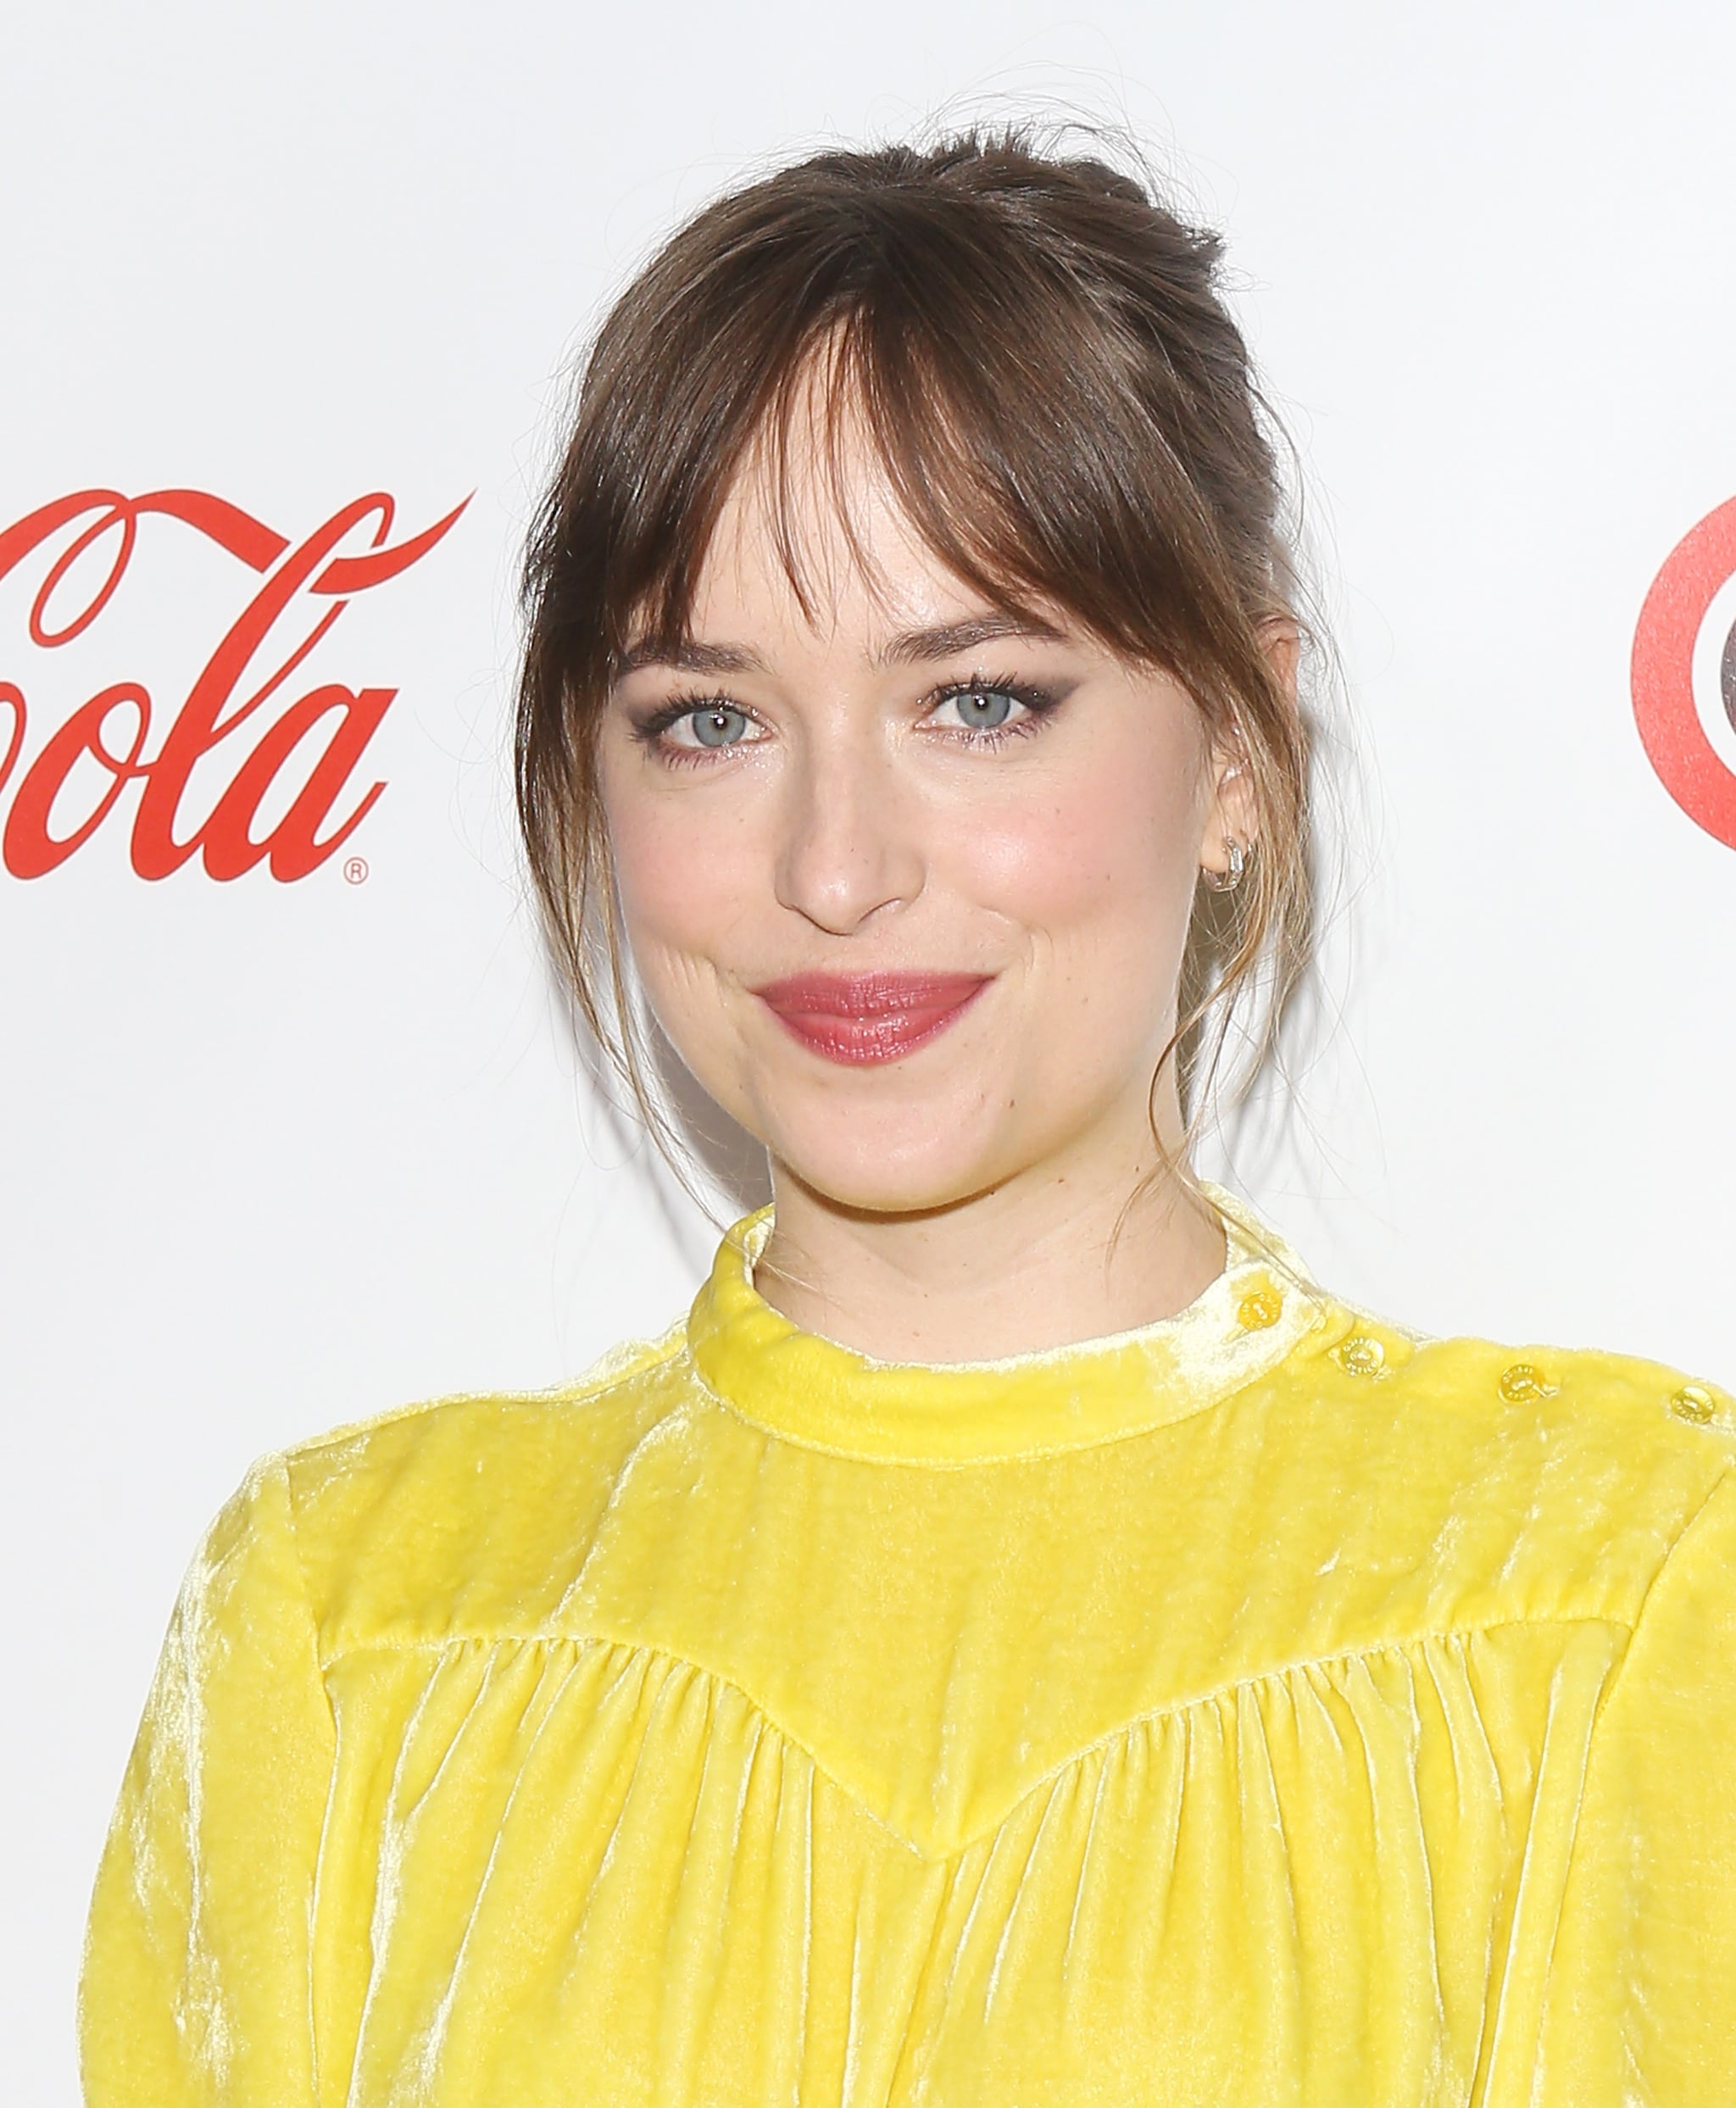 Dakota Johnson Says She Became an Actress Thanks to Films Like 'Notting  Hill': 'I Loved Those Movies so Much'